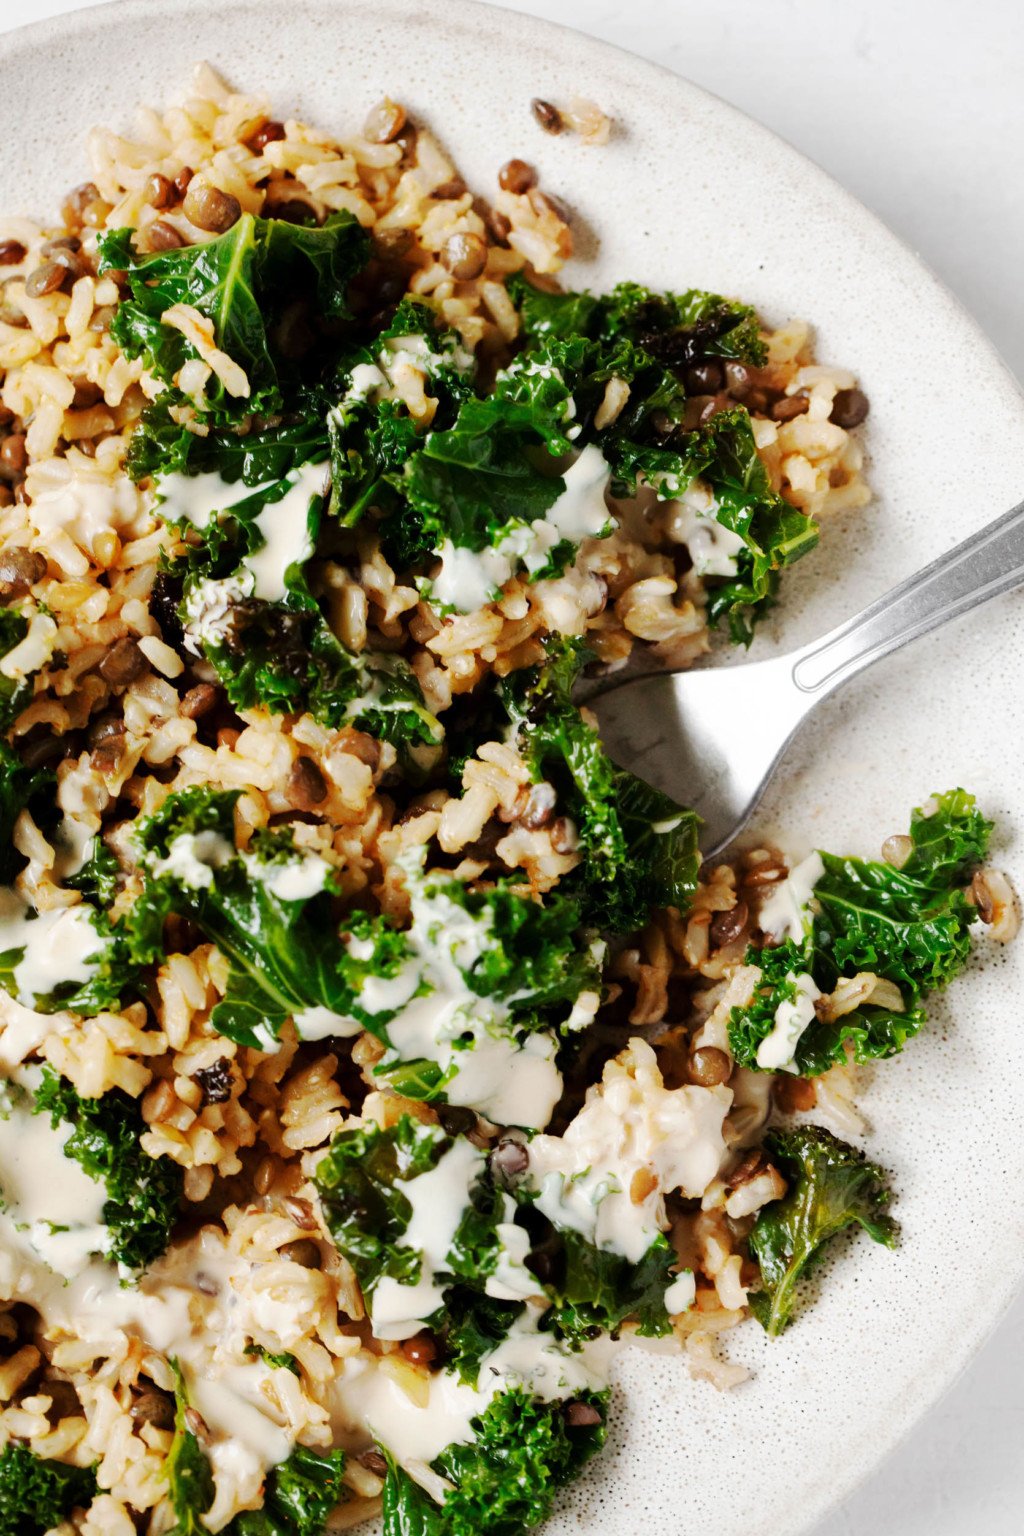 A close-up image of cumin-spiced lentils and rice, which have been mixed with steamed kale and topped with a tahini sauce.